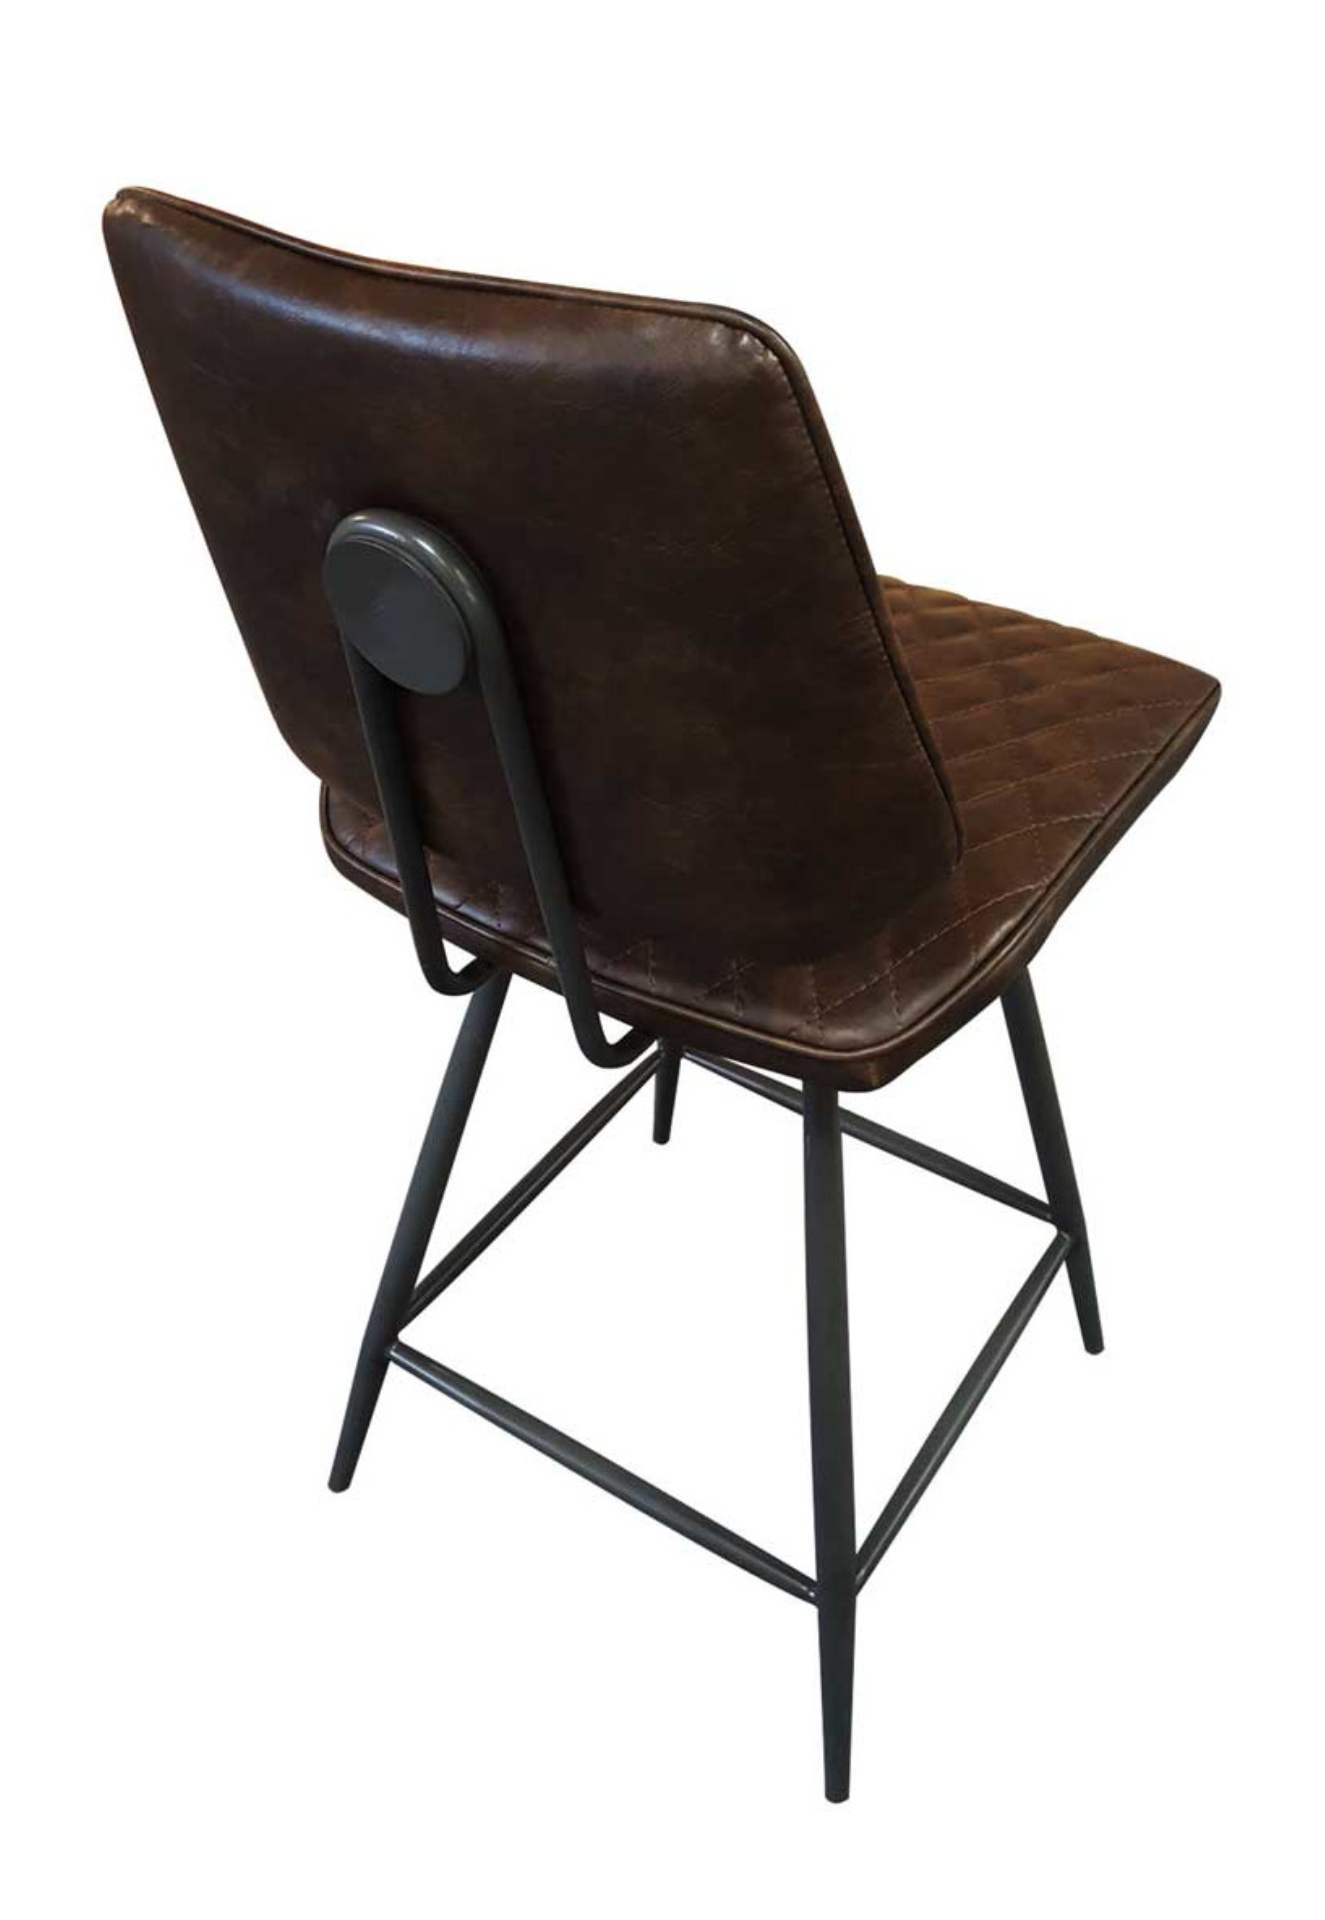 bar chair, industrial style bar chair in brown faux leather